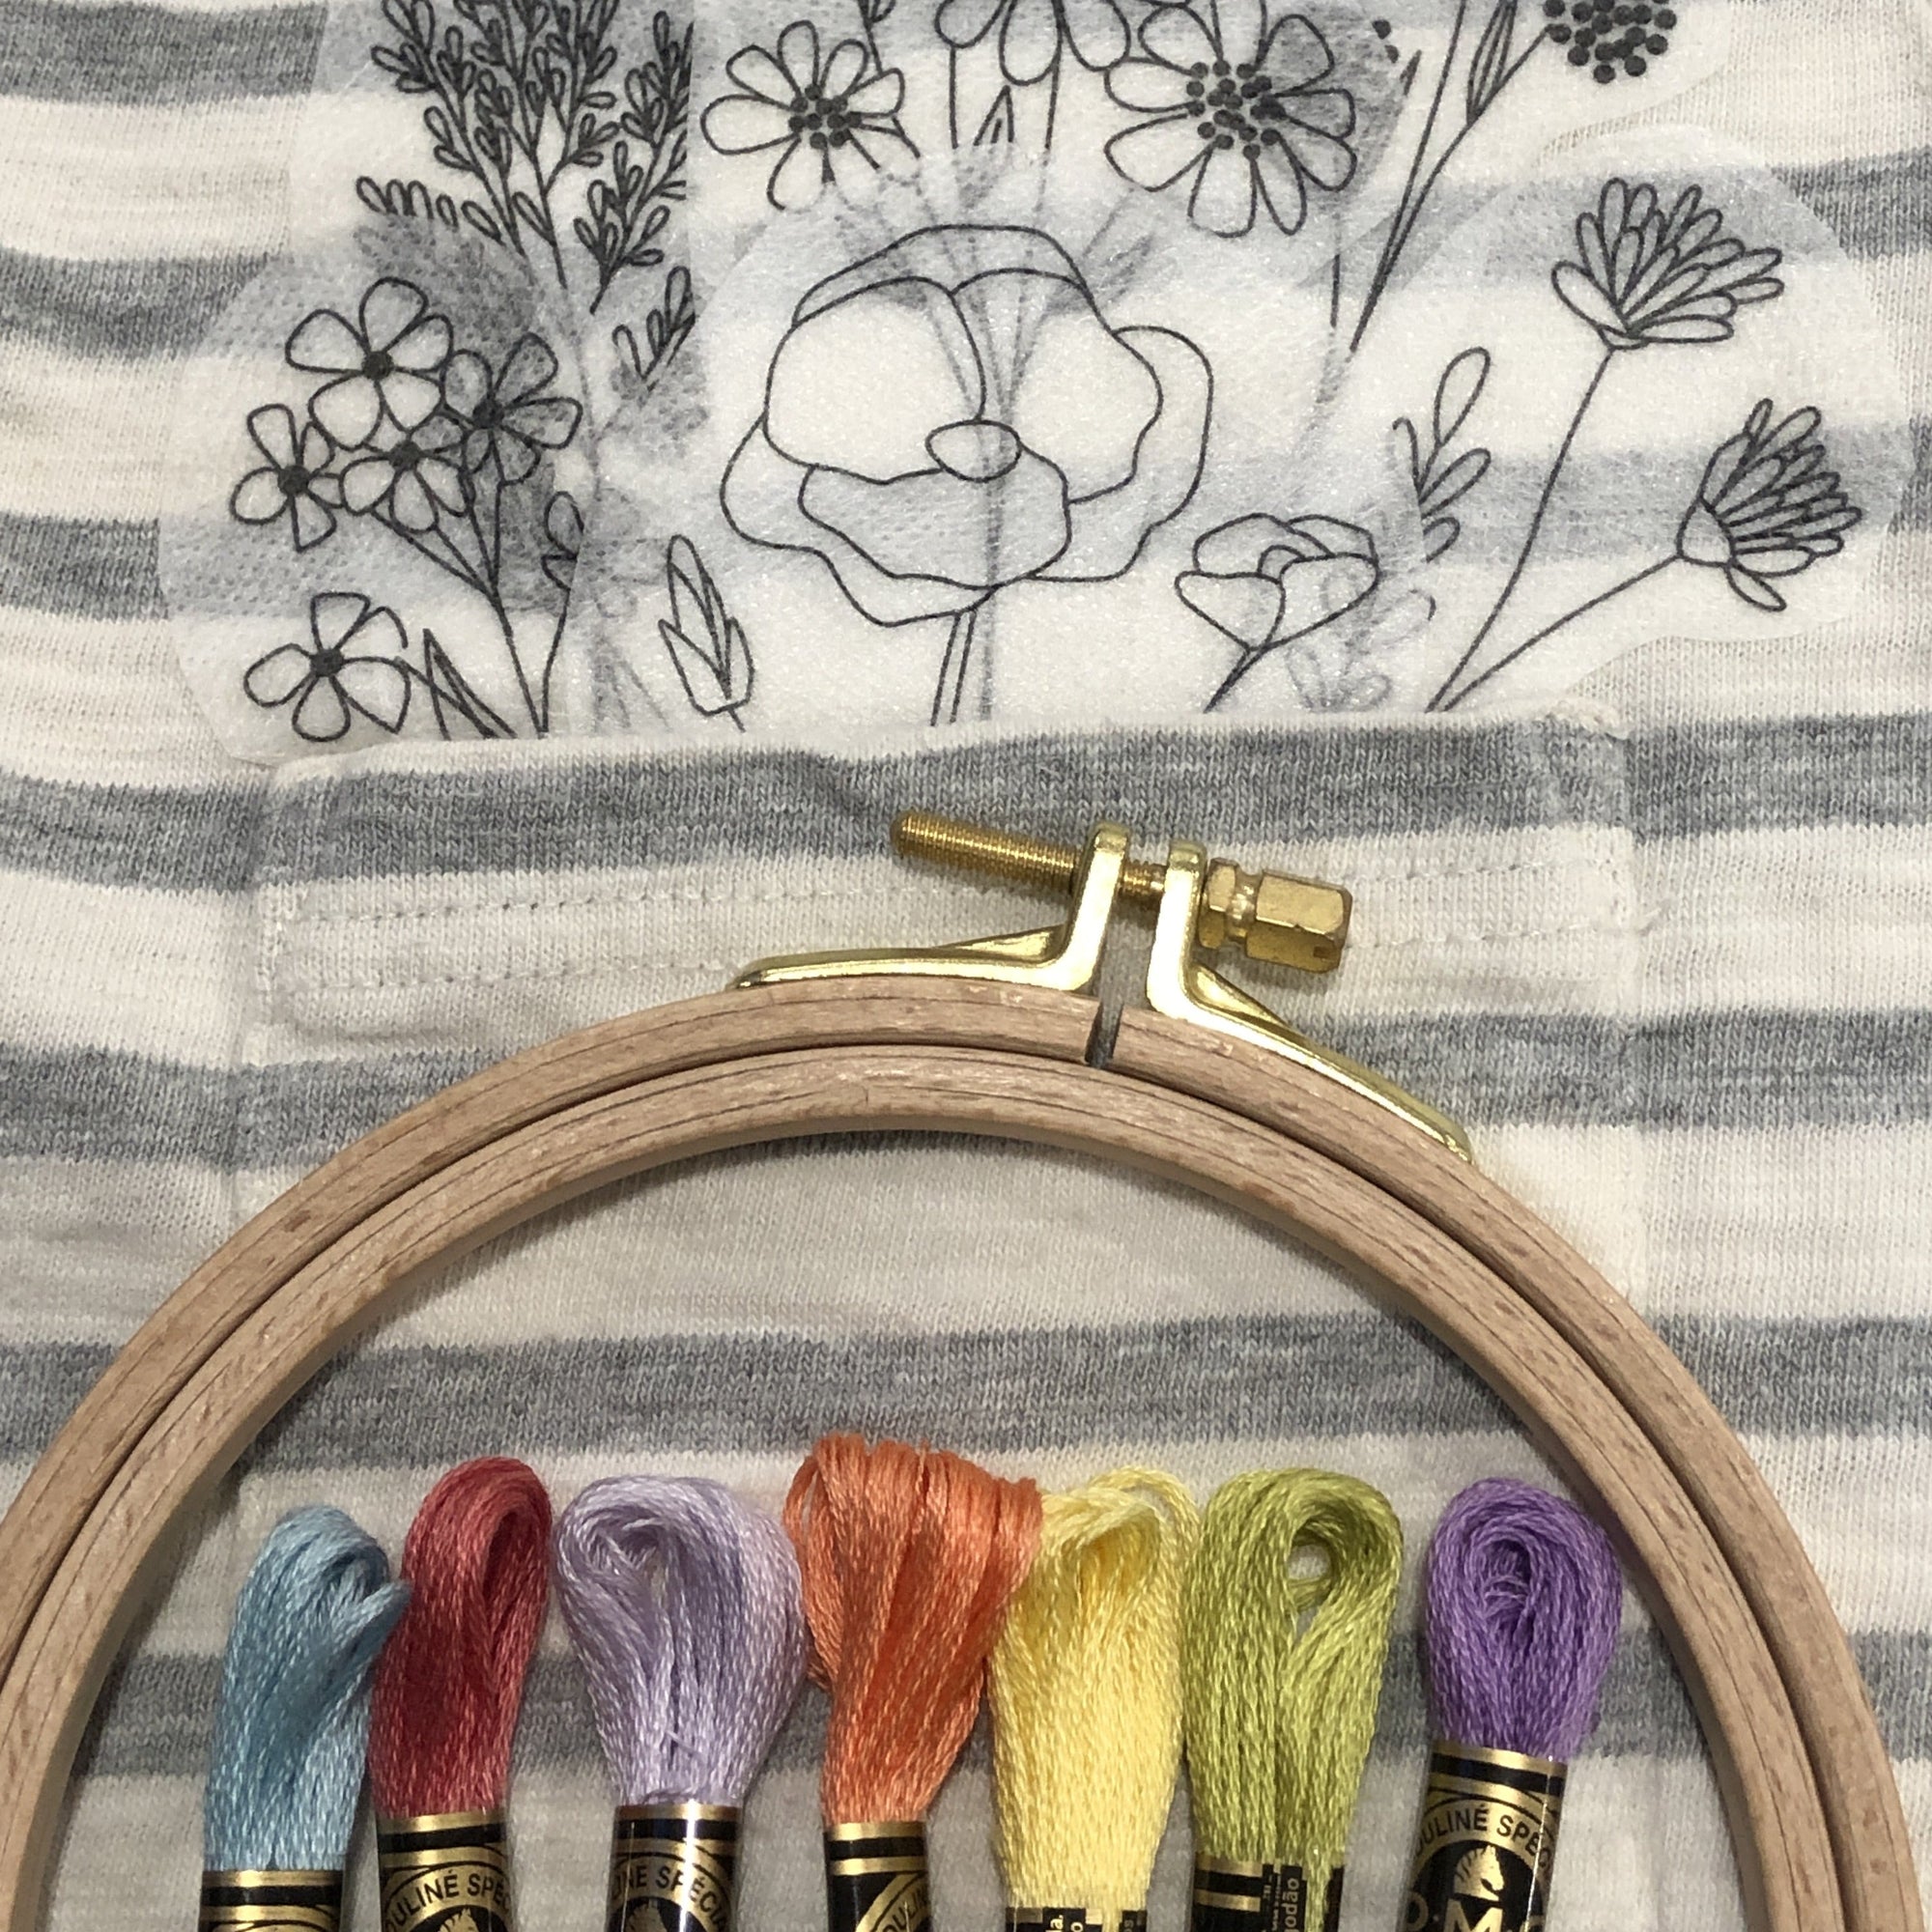 Embroidery: Sophisticated, Fun Thread Art